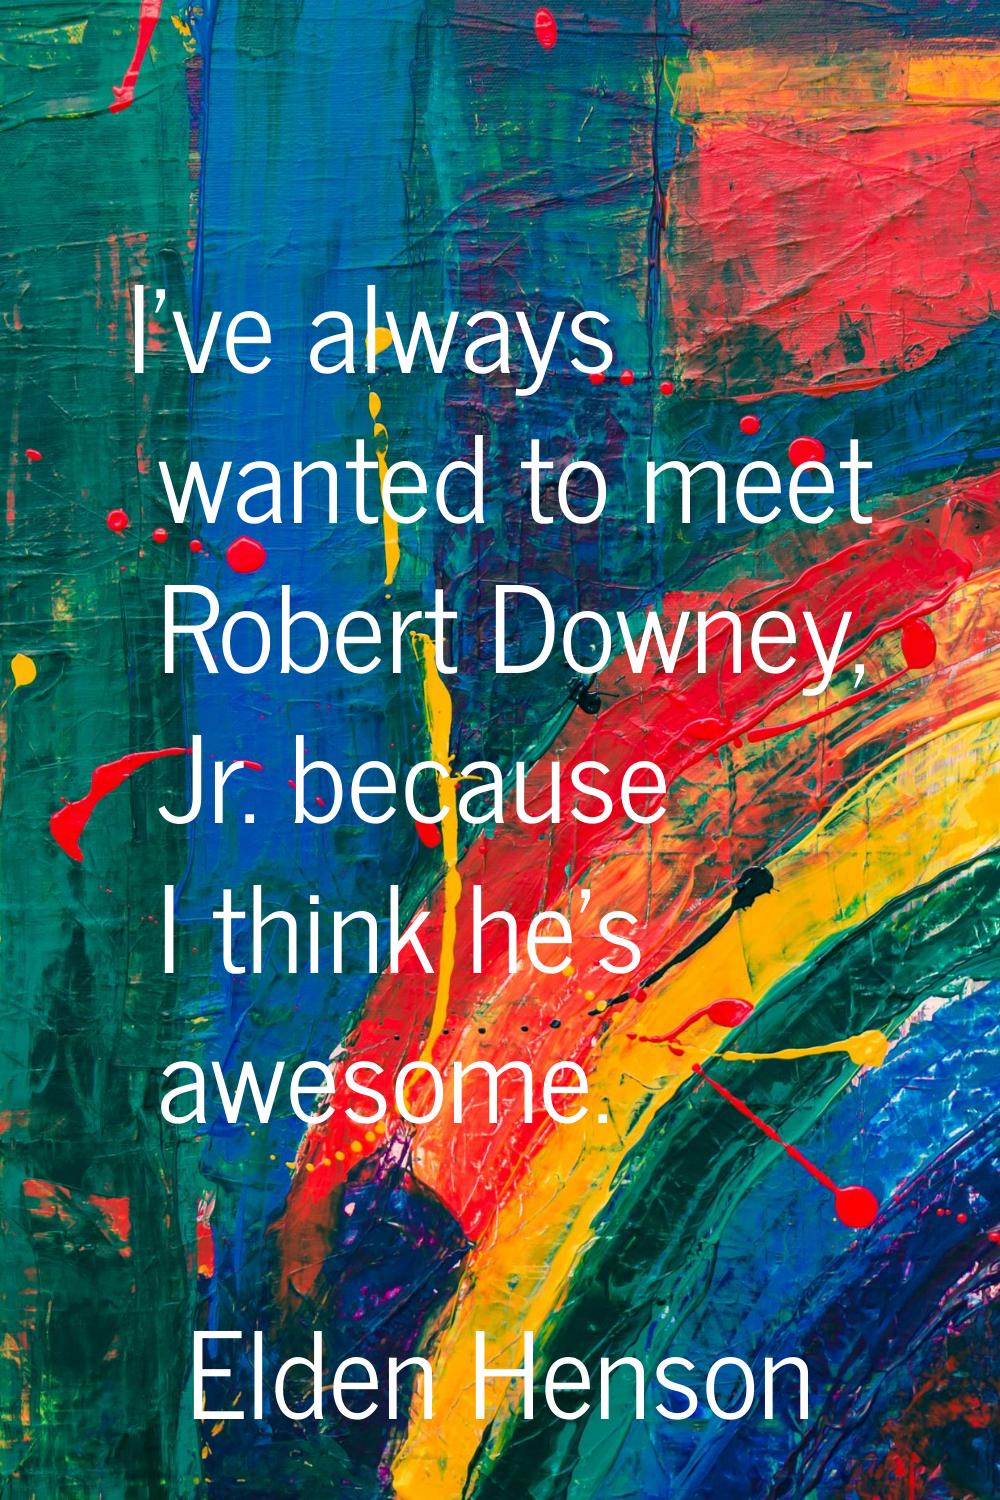 I've always wanted to meet Robert Downey, Jr. because I think he's awesome.